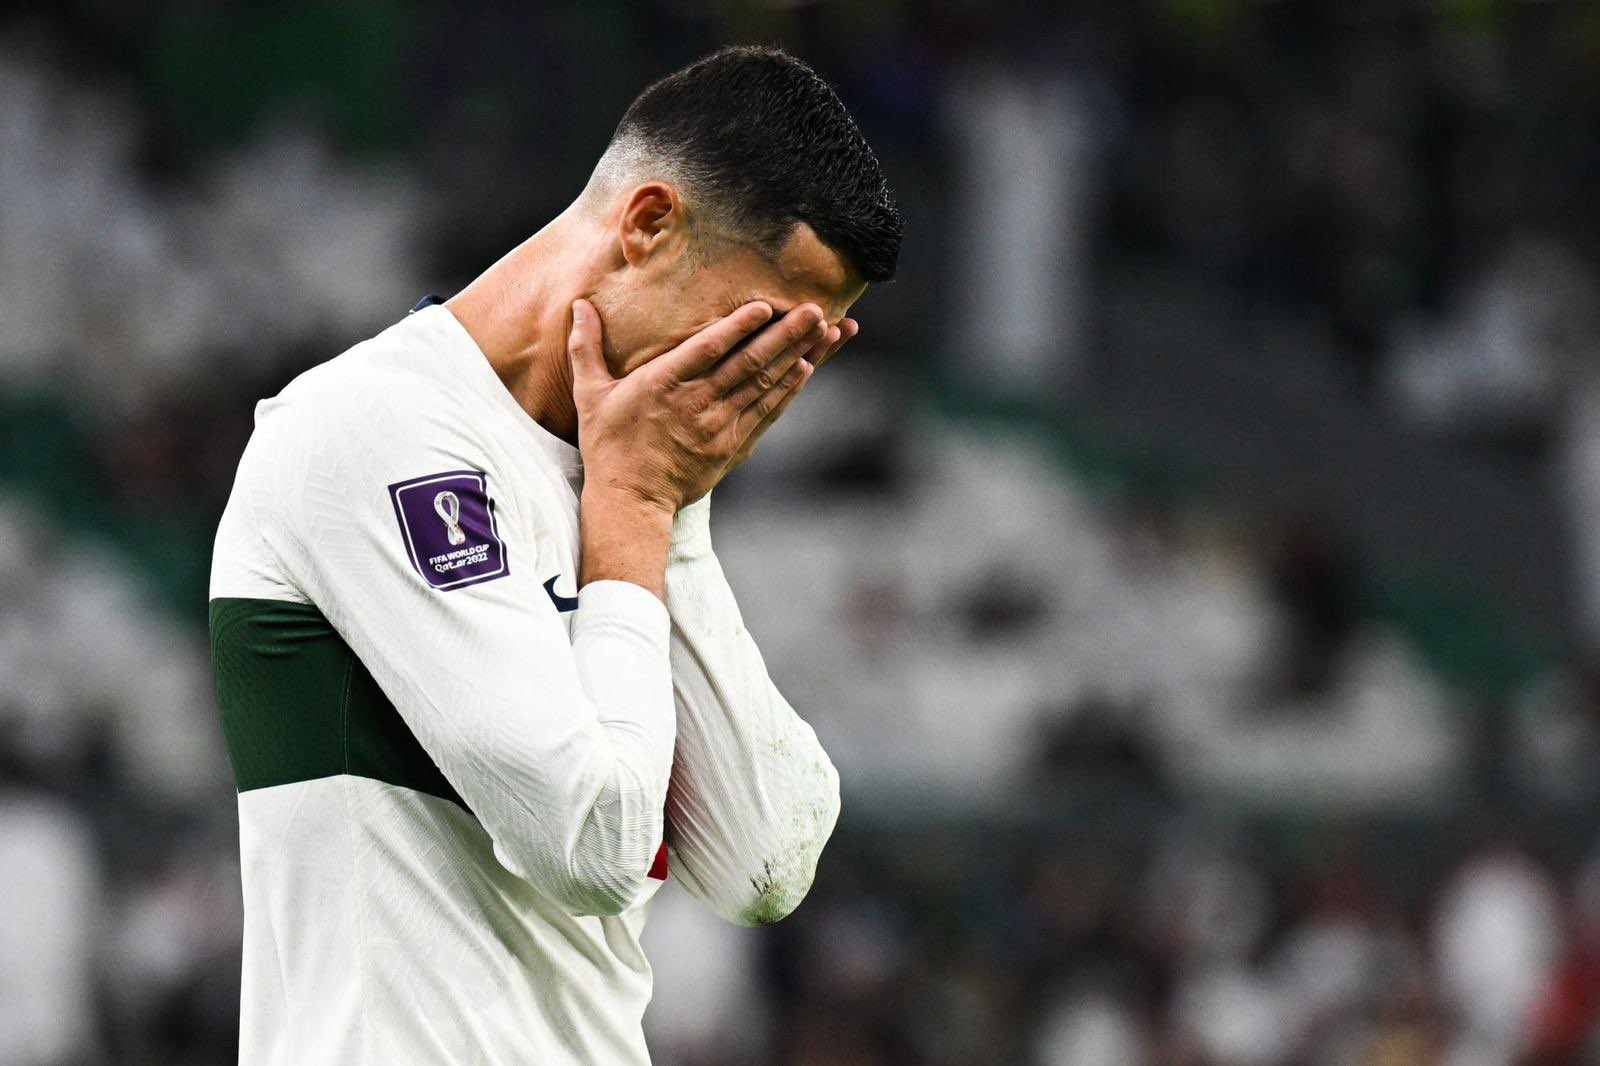 Cristiano Ronaldo’s sister reacts to video of brother crying after Portugal’s exit